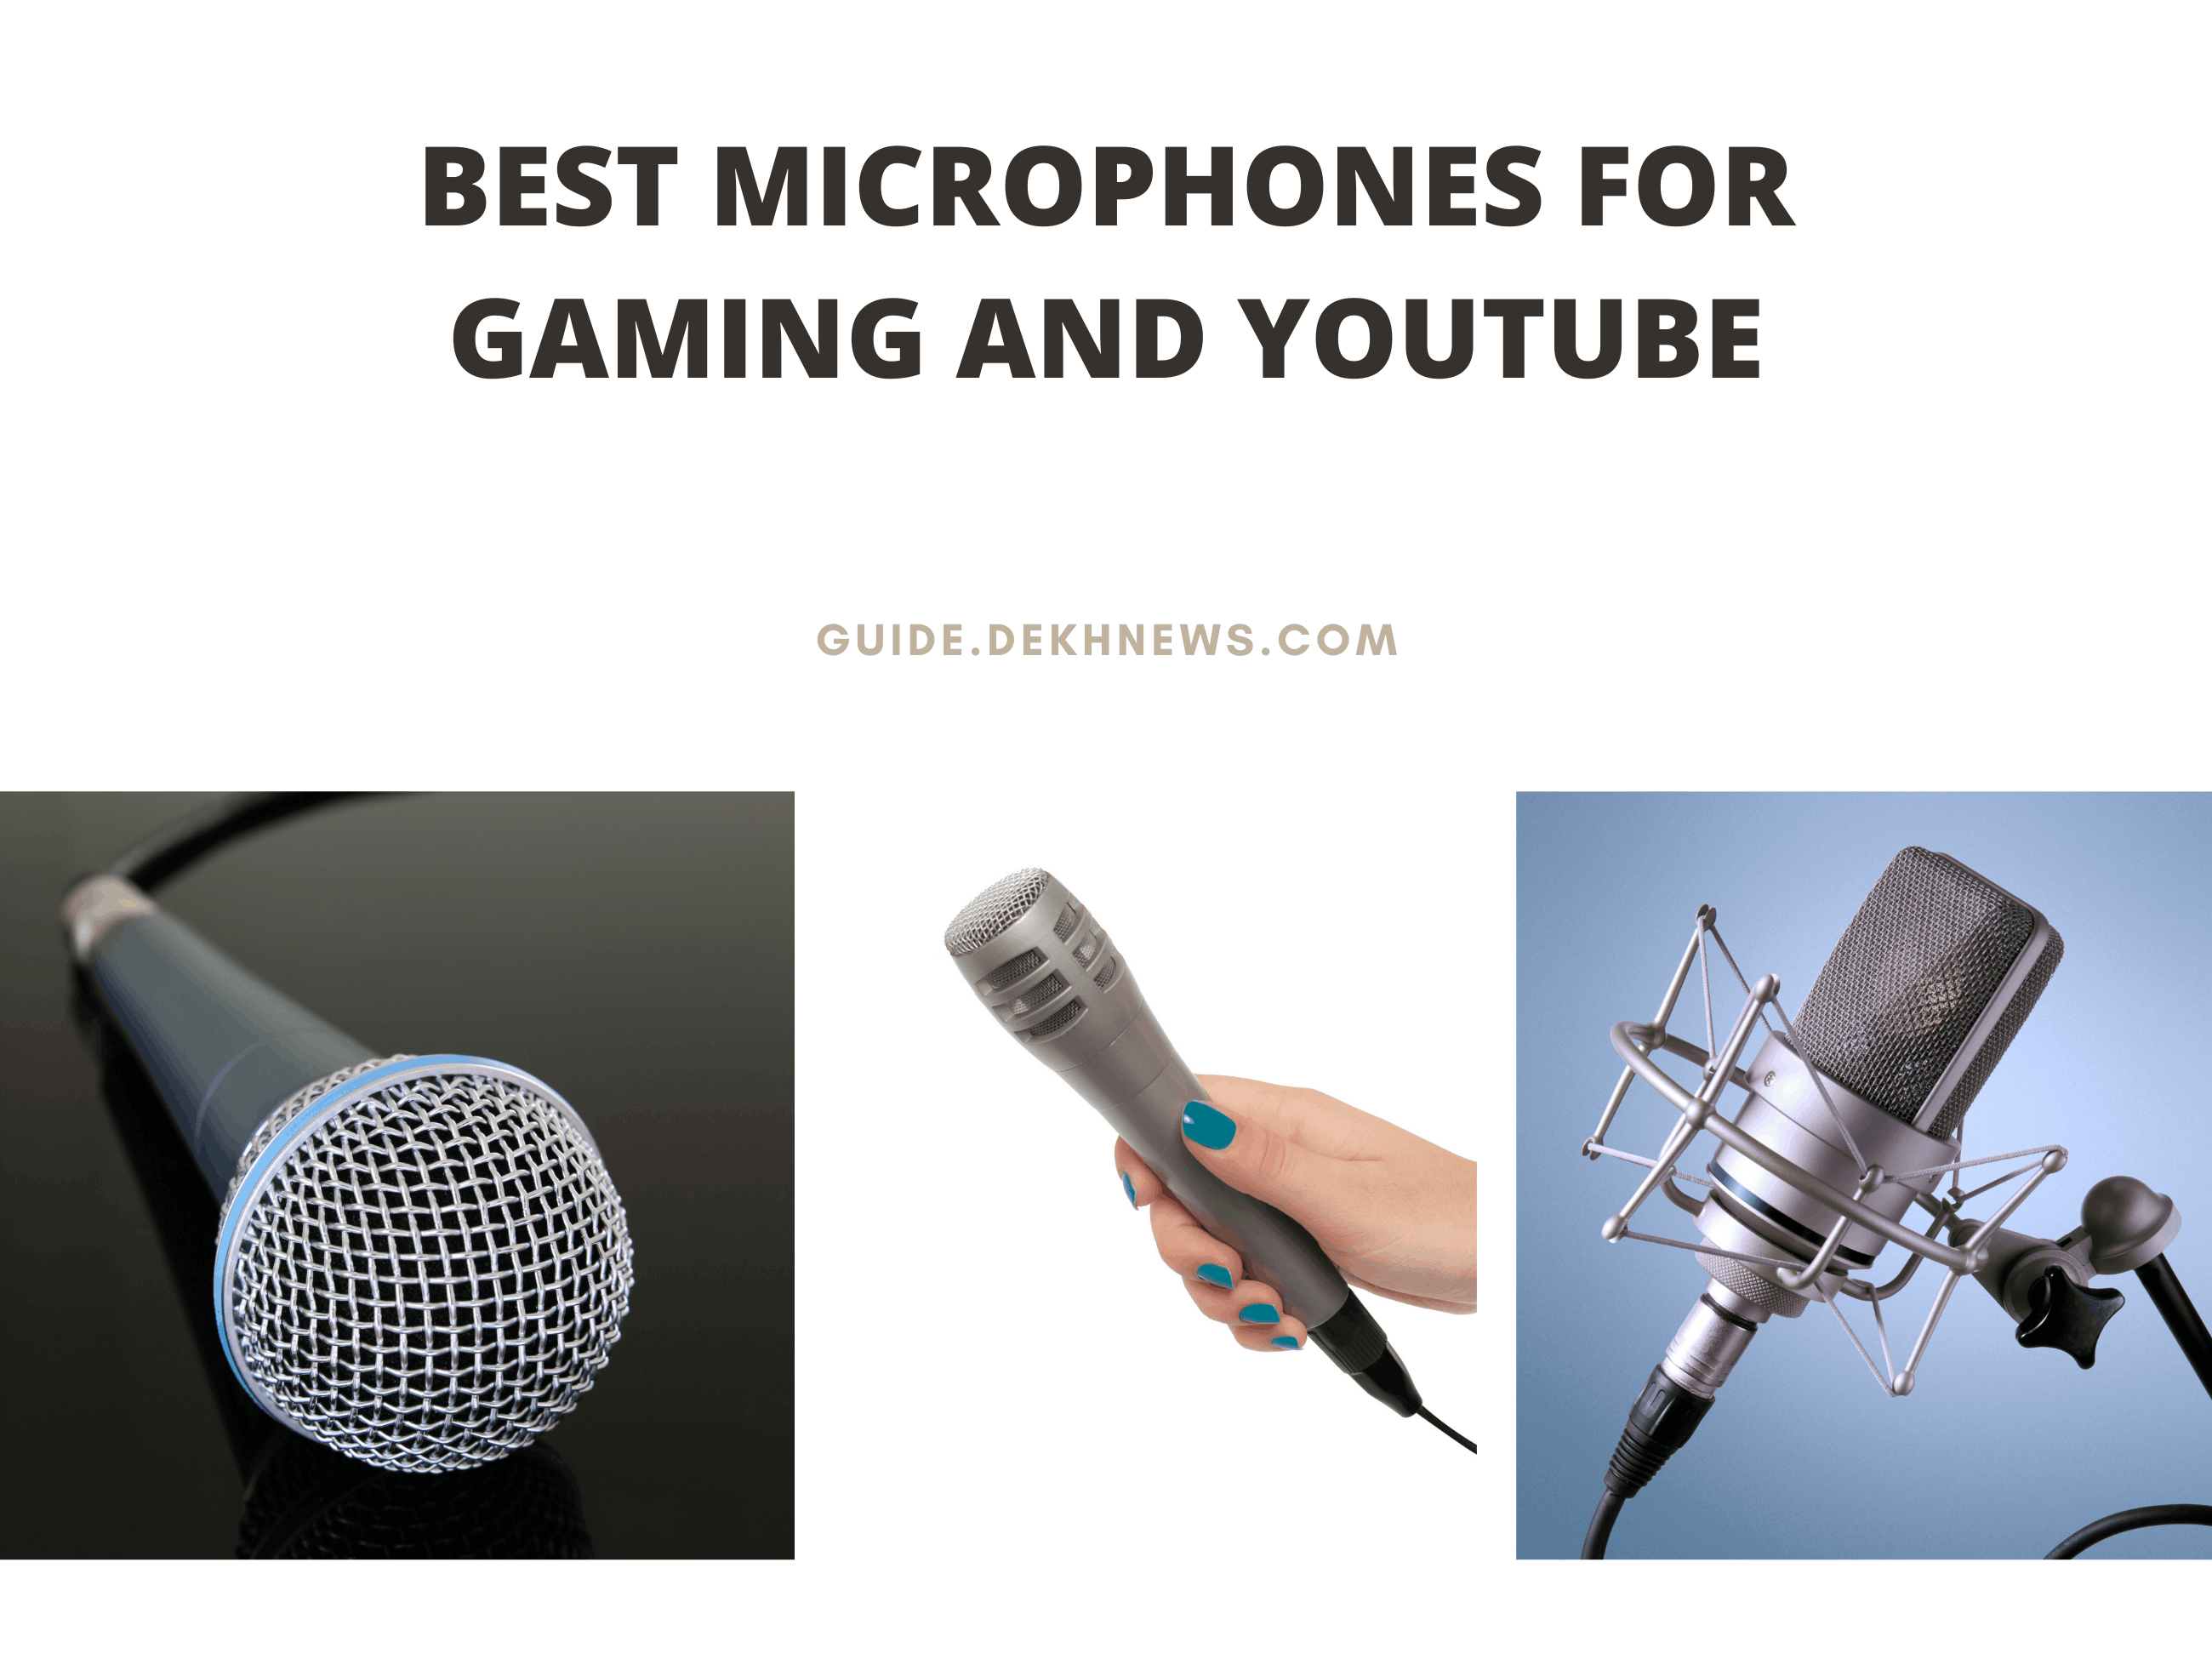 5 Best Microphones for Gaming and YouTube Reviews | 2022 Mic Guide